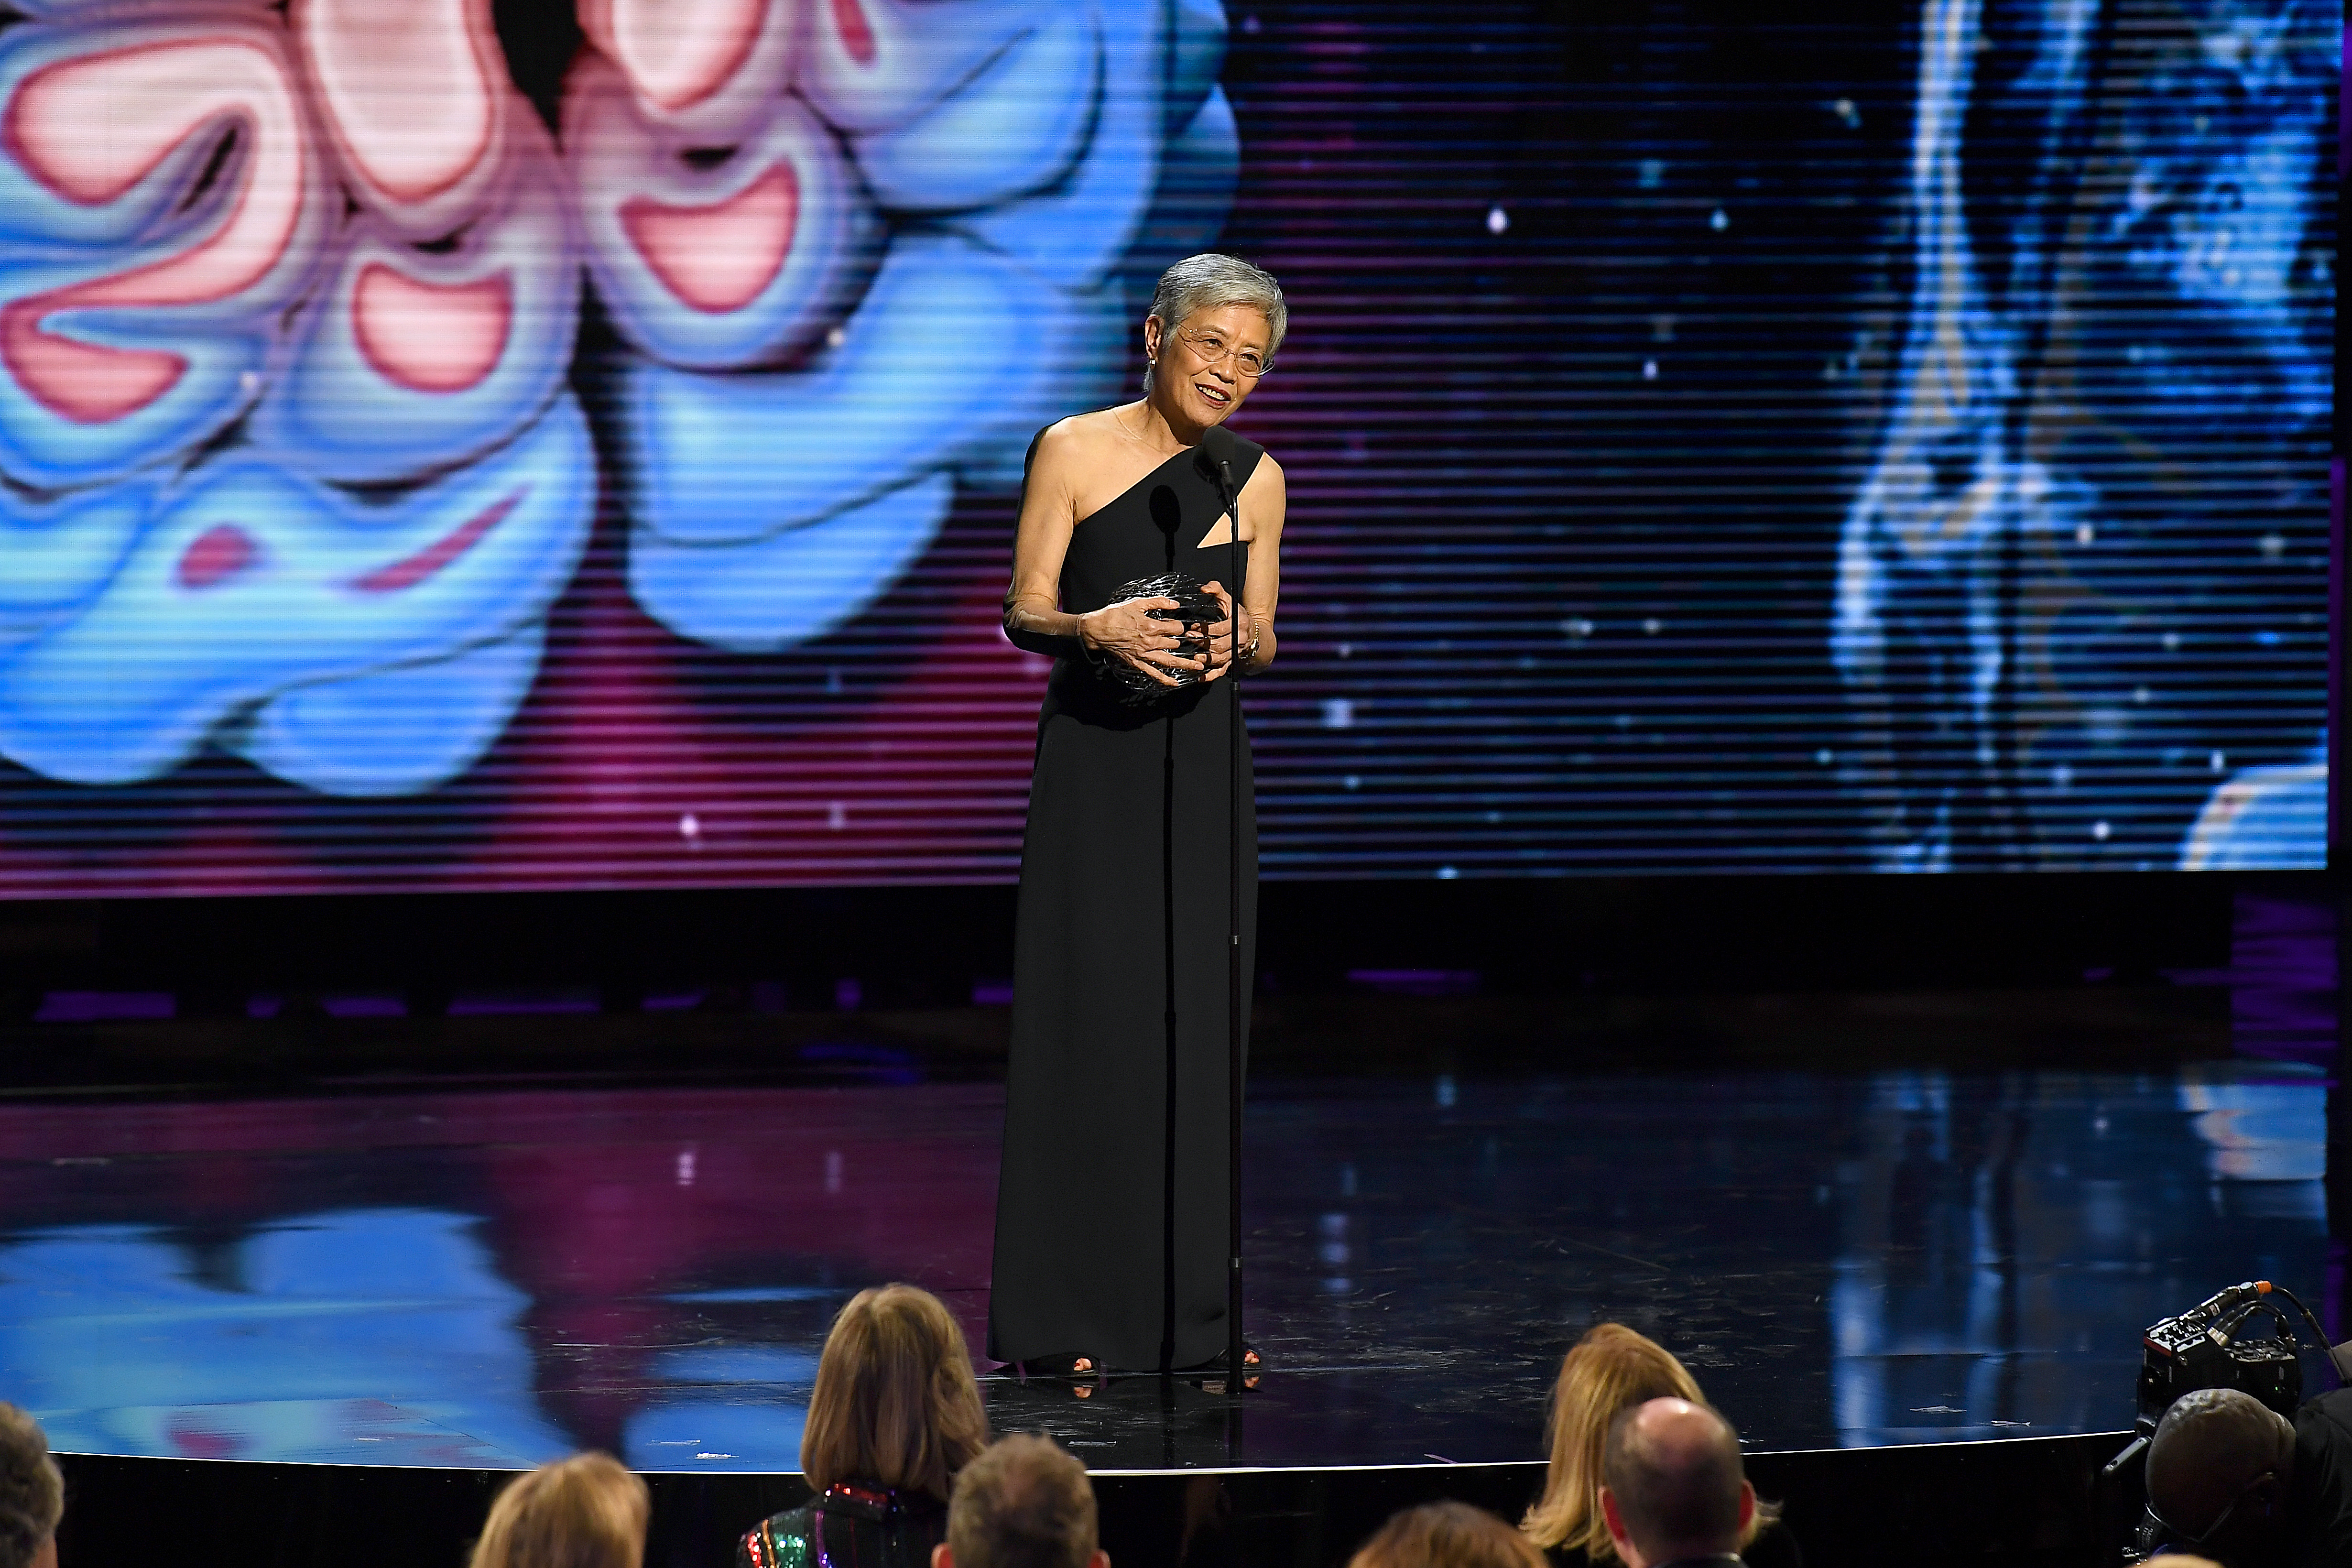 Virginia Lee stands on stage speaking into a microphone accepting her Breakthrough Prize Award